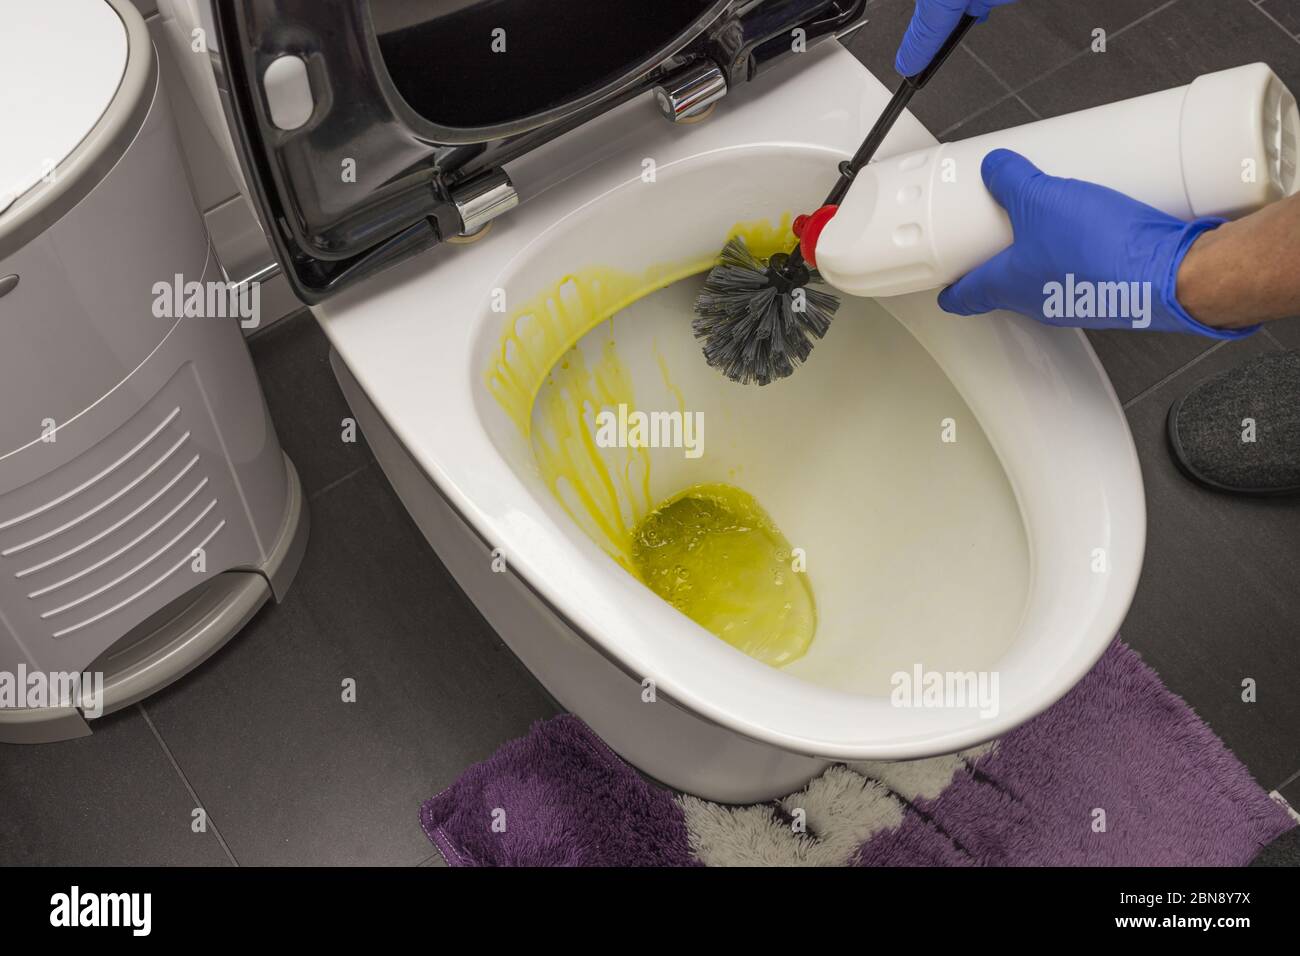 Close up view of male hands in blue gloves cleaning toilet seat. Hygiene concept. Stock Photo